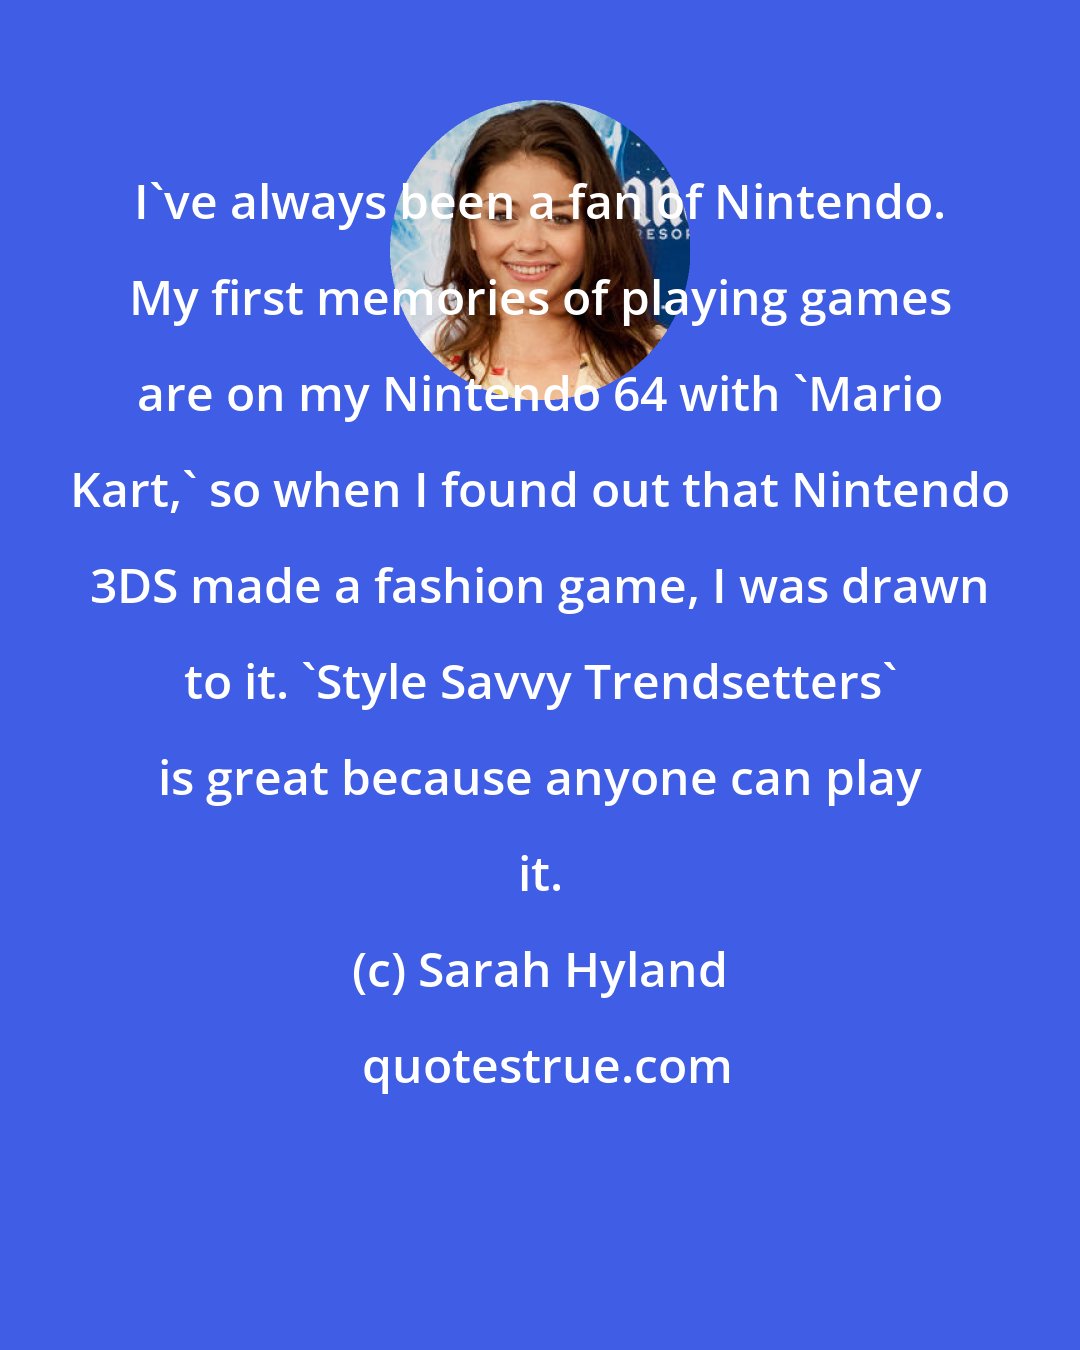 Sarah Hyland: I've always been a fan of Nintendo. My first memories of playing games are on my Nintendo 64 with 'Mario Kart,' so when I found out that Nintendo 3DS made a fashion game, I was drawn to it. 'Style Savvy Trendsetters' is great because anyone can play it.